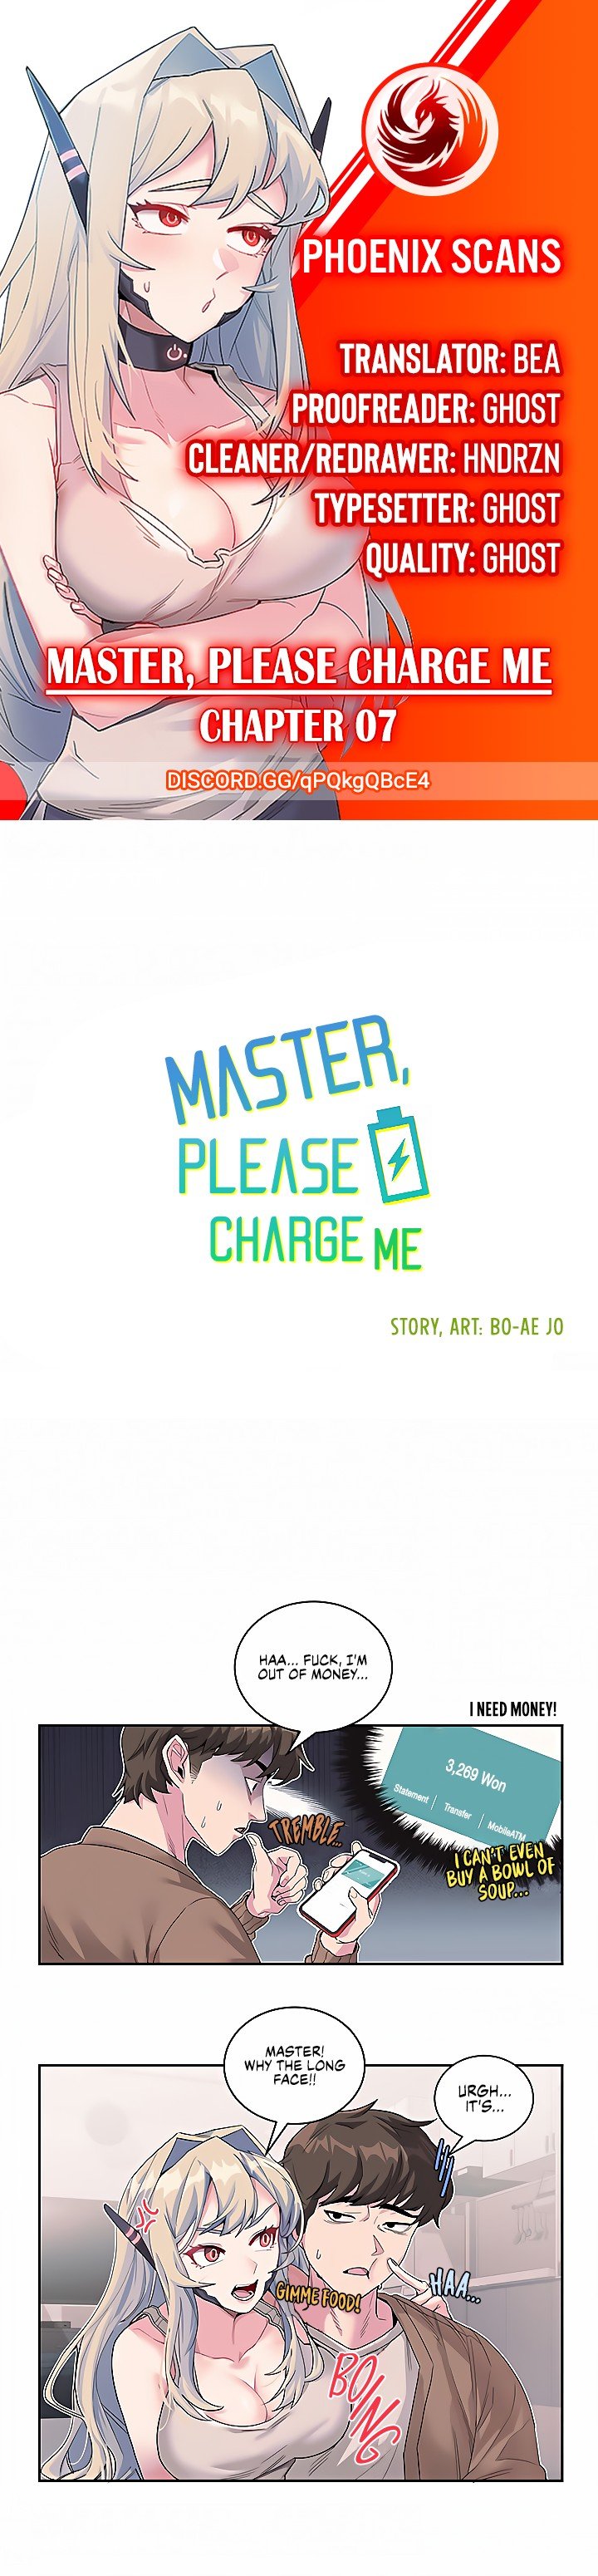 master-please-charge-me-chap-7-0